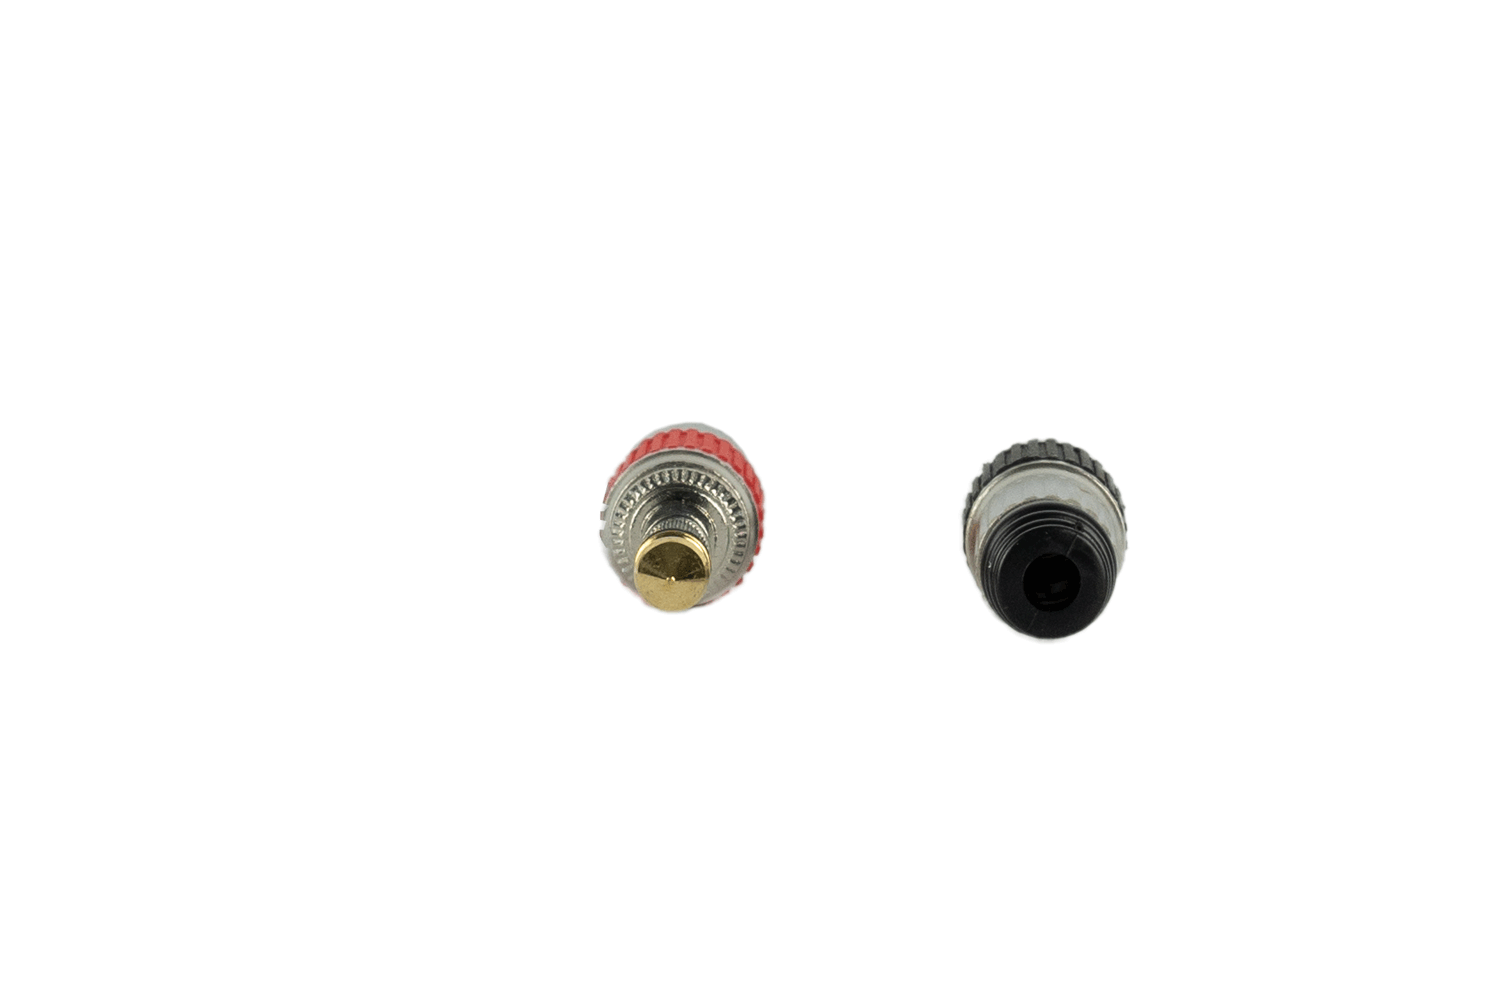 Event Audio JACKTS - Pair of Jack TS Male Plugs top view